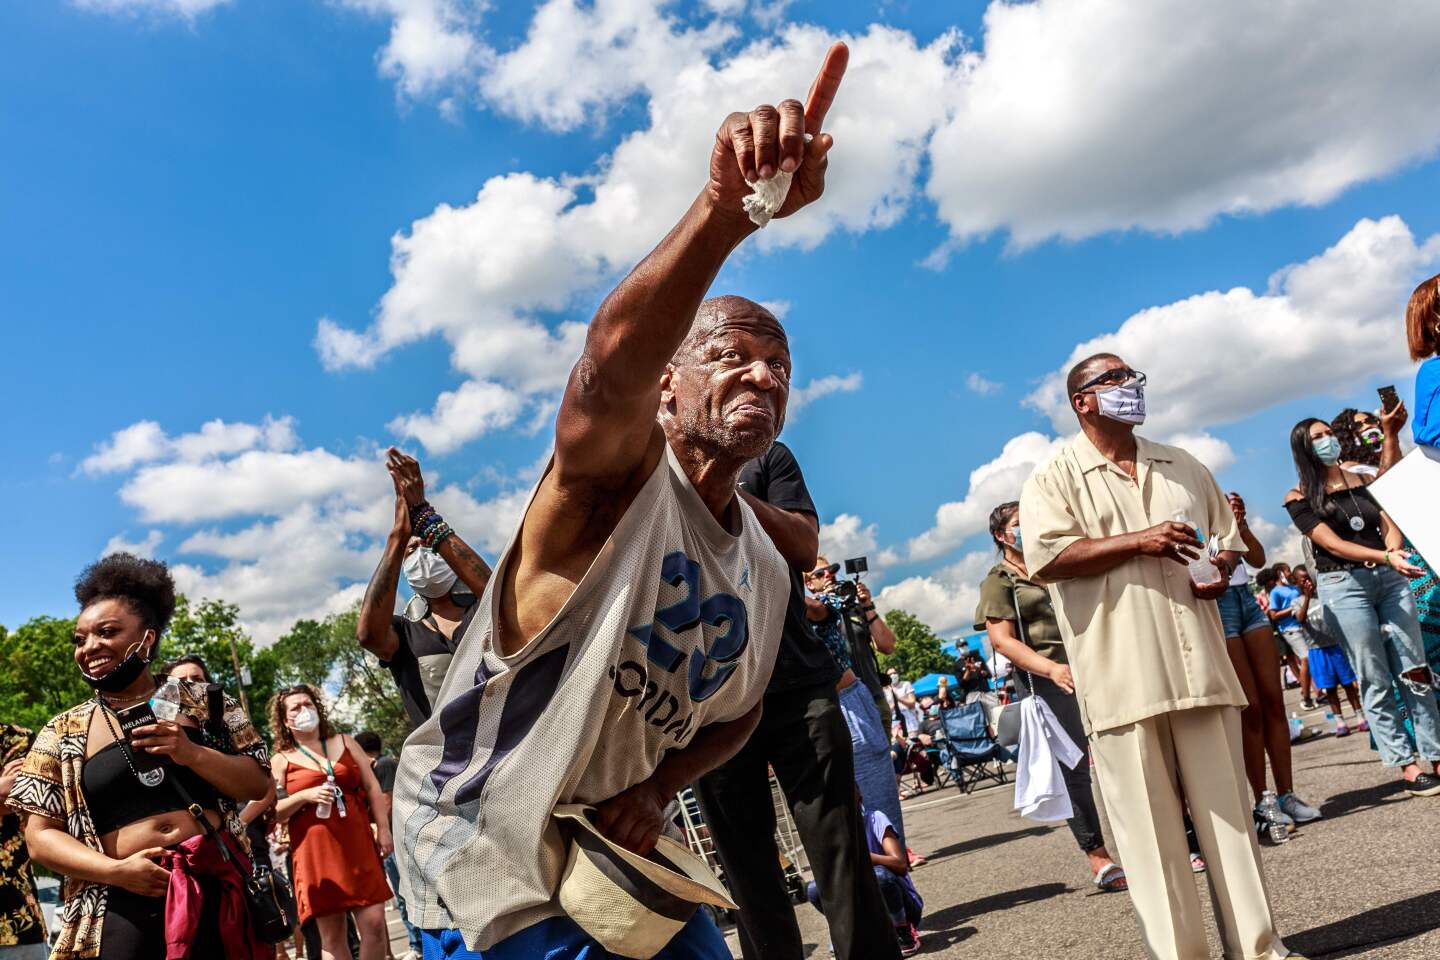 A man dances during a Juneteenth event in Minneapolis.